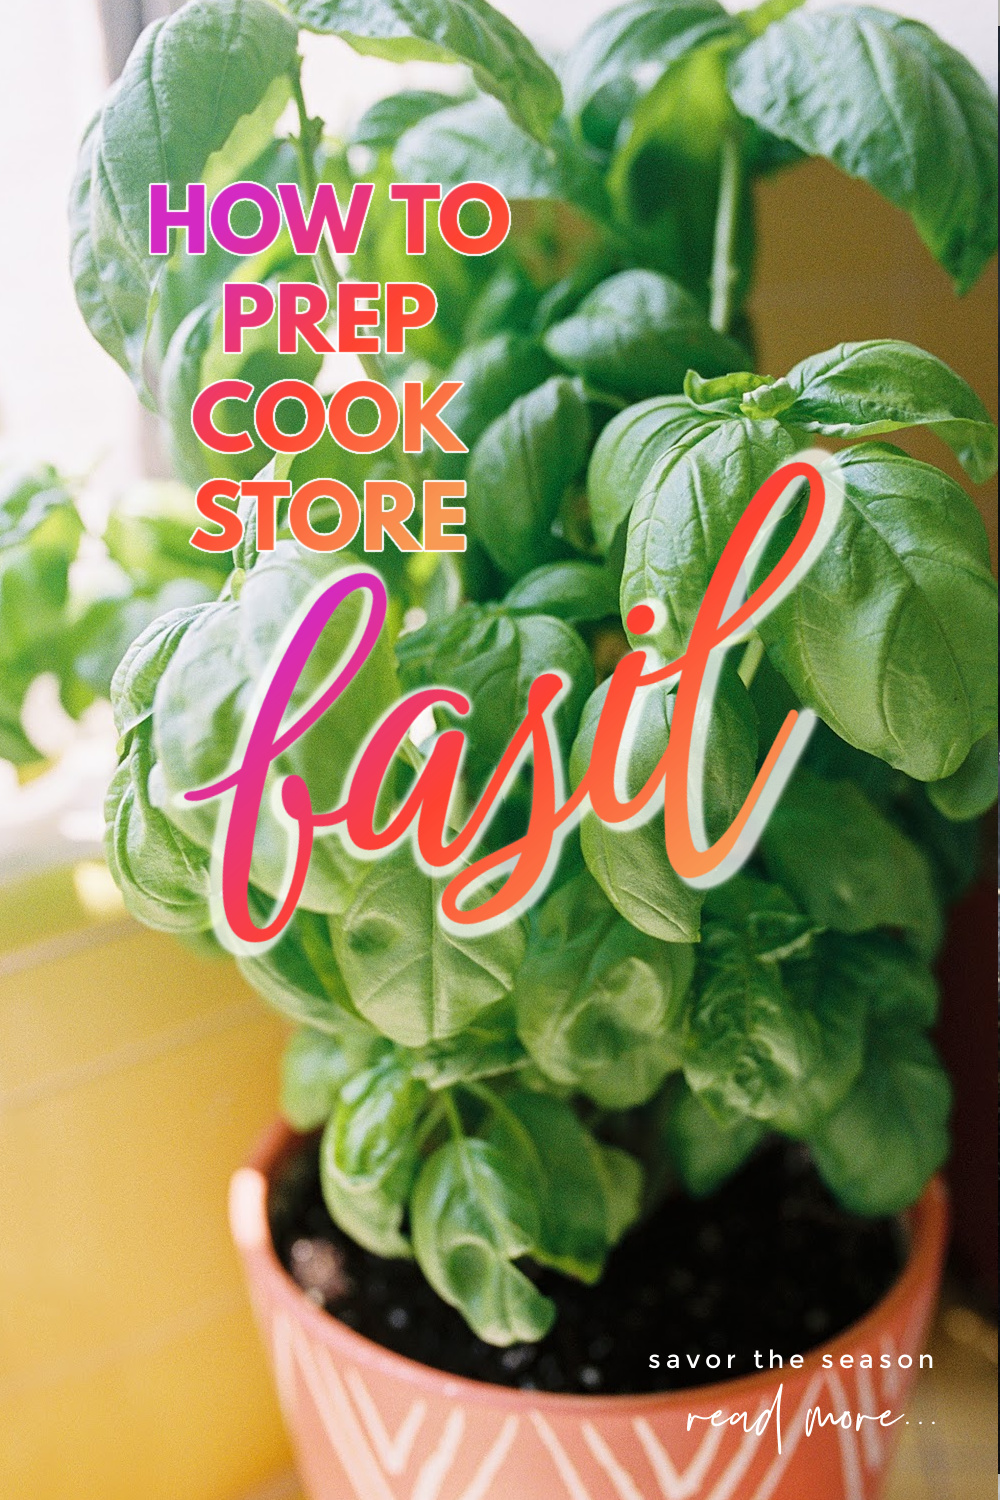 Pot with basil plant and overlay label.